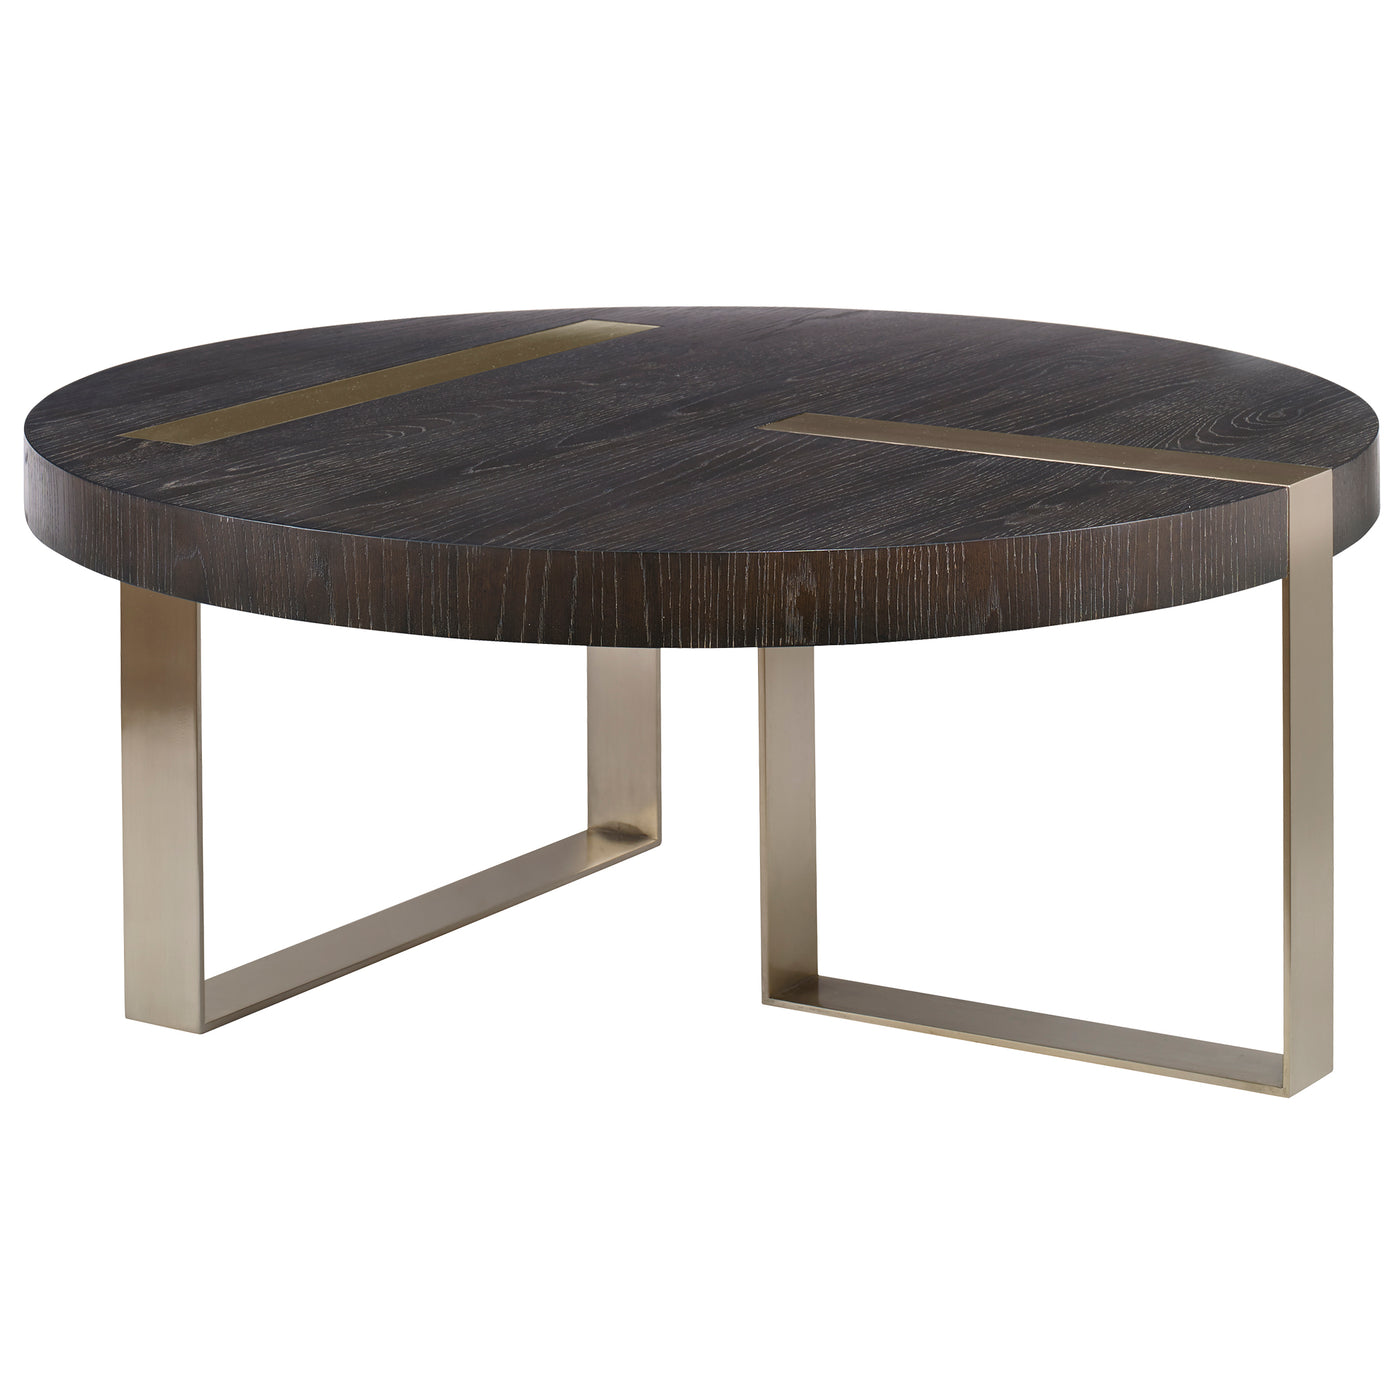 Sleek And Modern, This Coffee Table Showcases Linear Steel Accents Plated In A Brushed Pewter Accented By A Dry Ebony Fini...